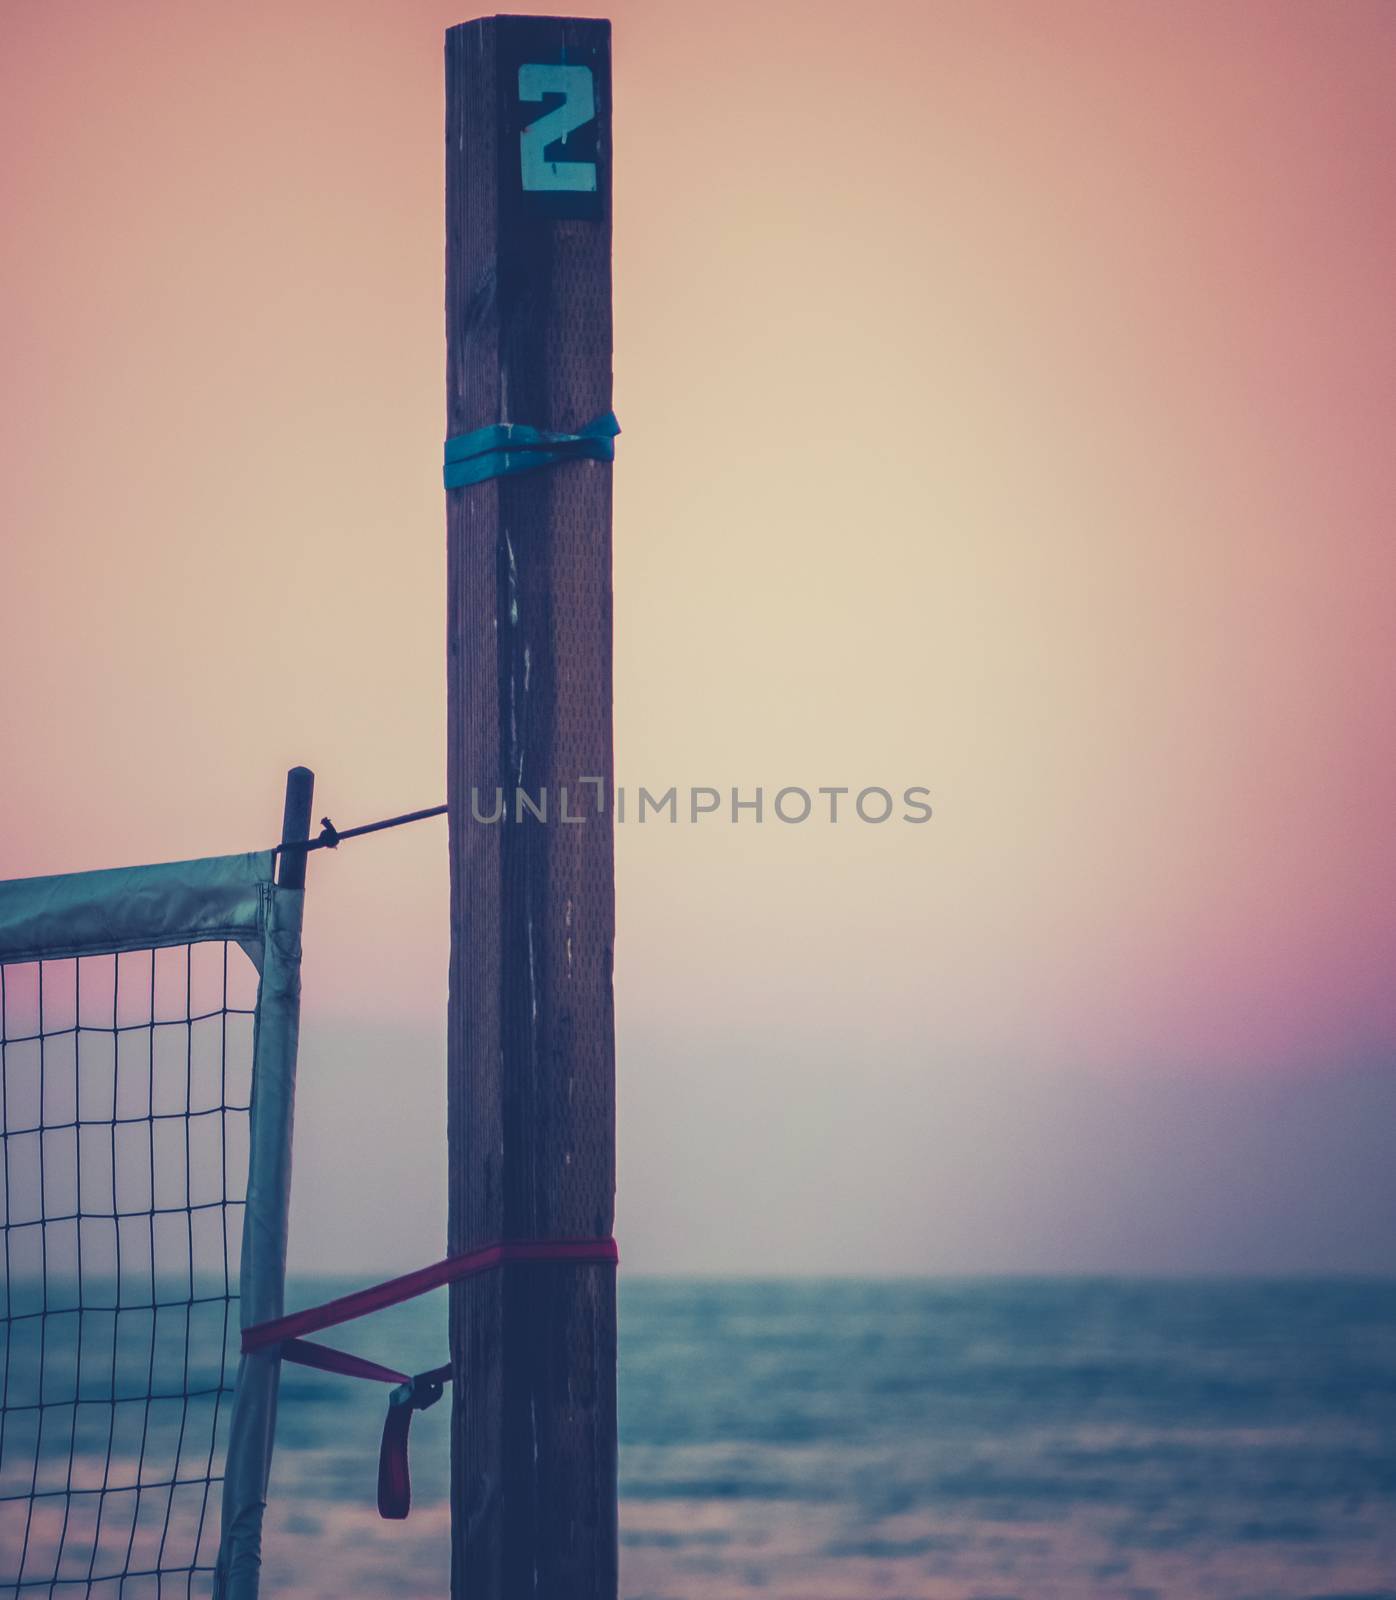 Sports Image Of A Beach Volleyball Net On A Californian Beach At Sunset With Copy Space